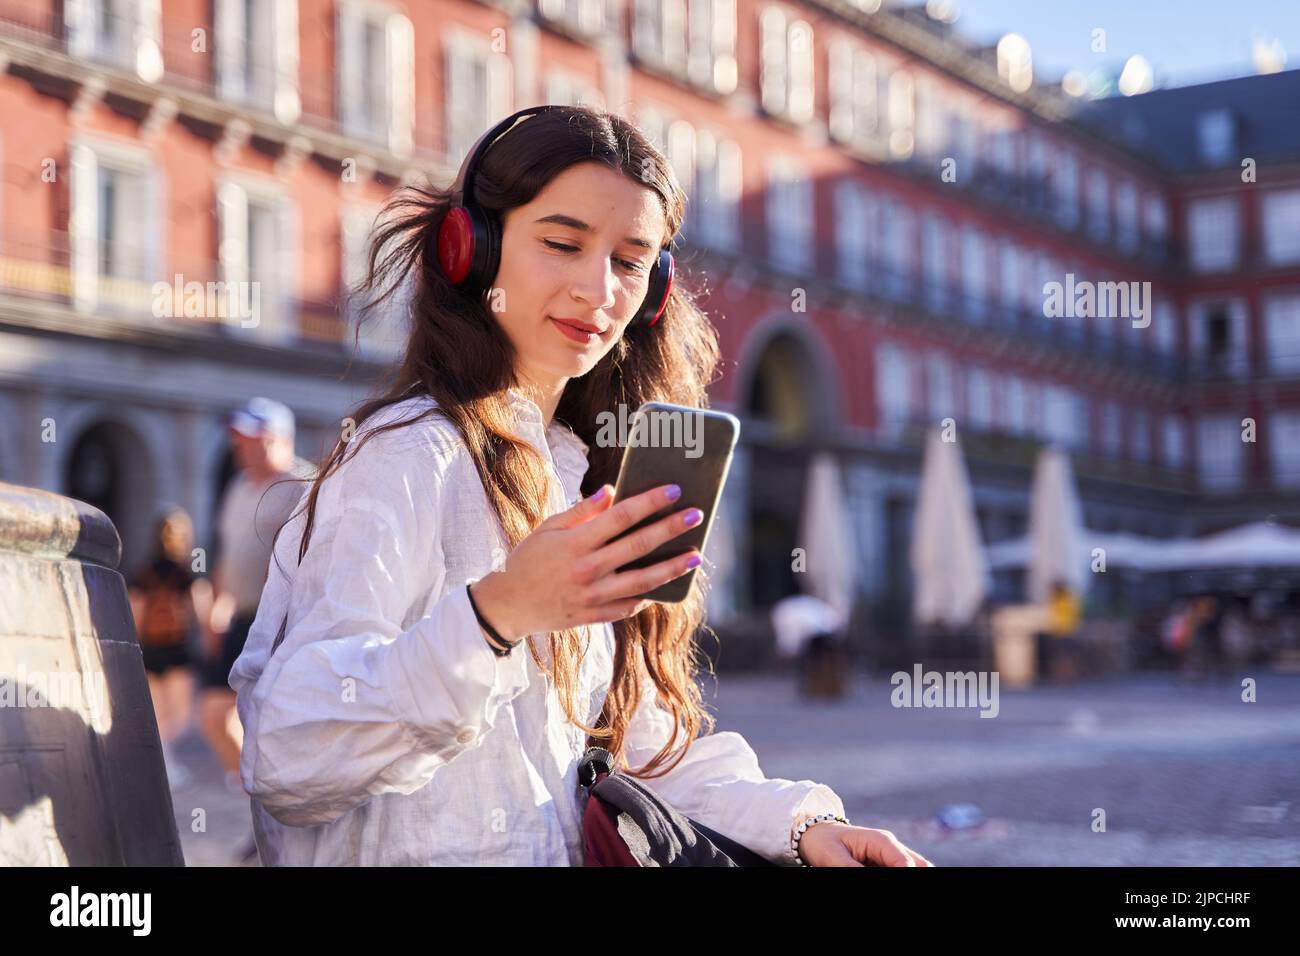 portrait of a young woman looking at a smart phone sitting in Madrid. Stock Photo